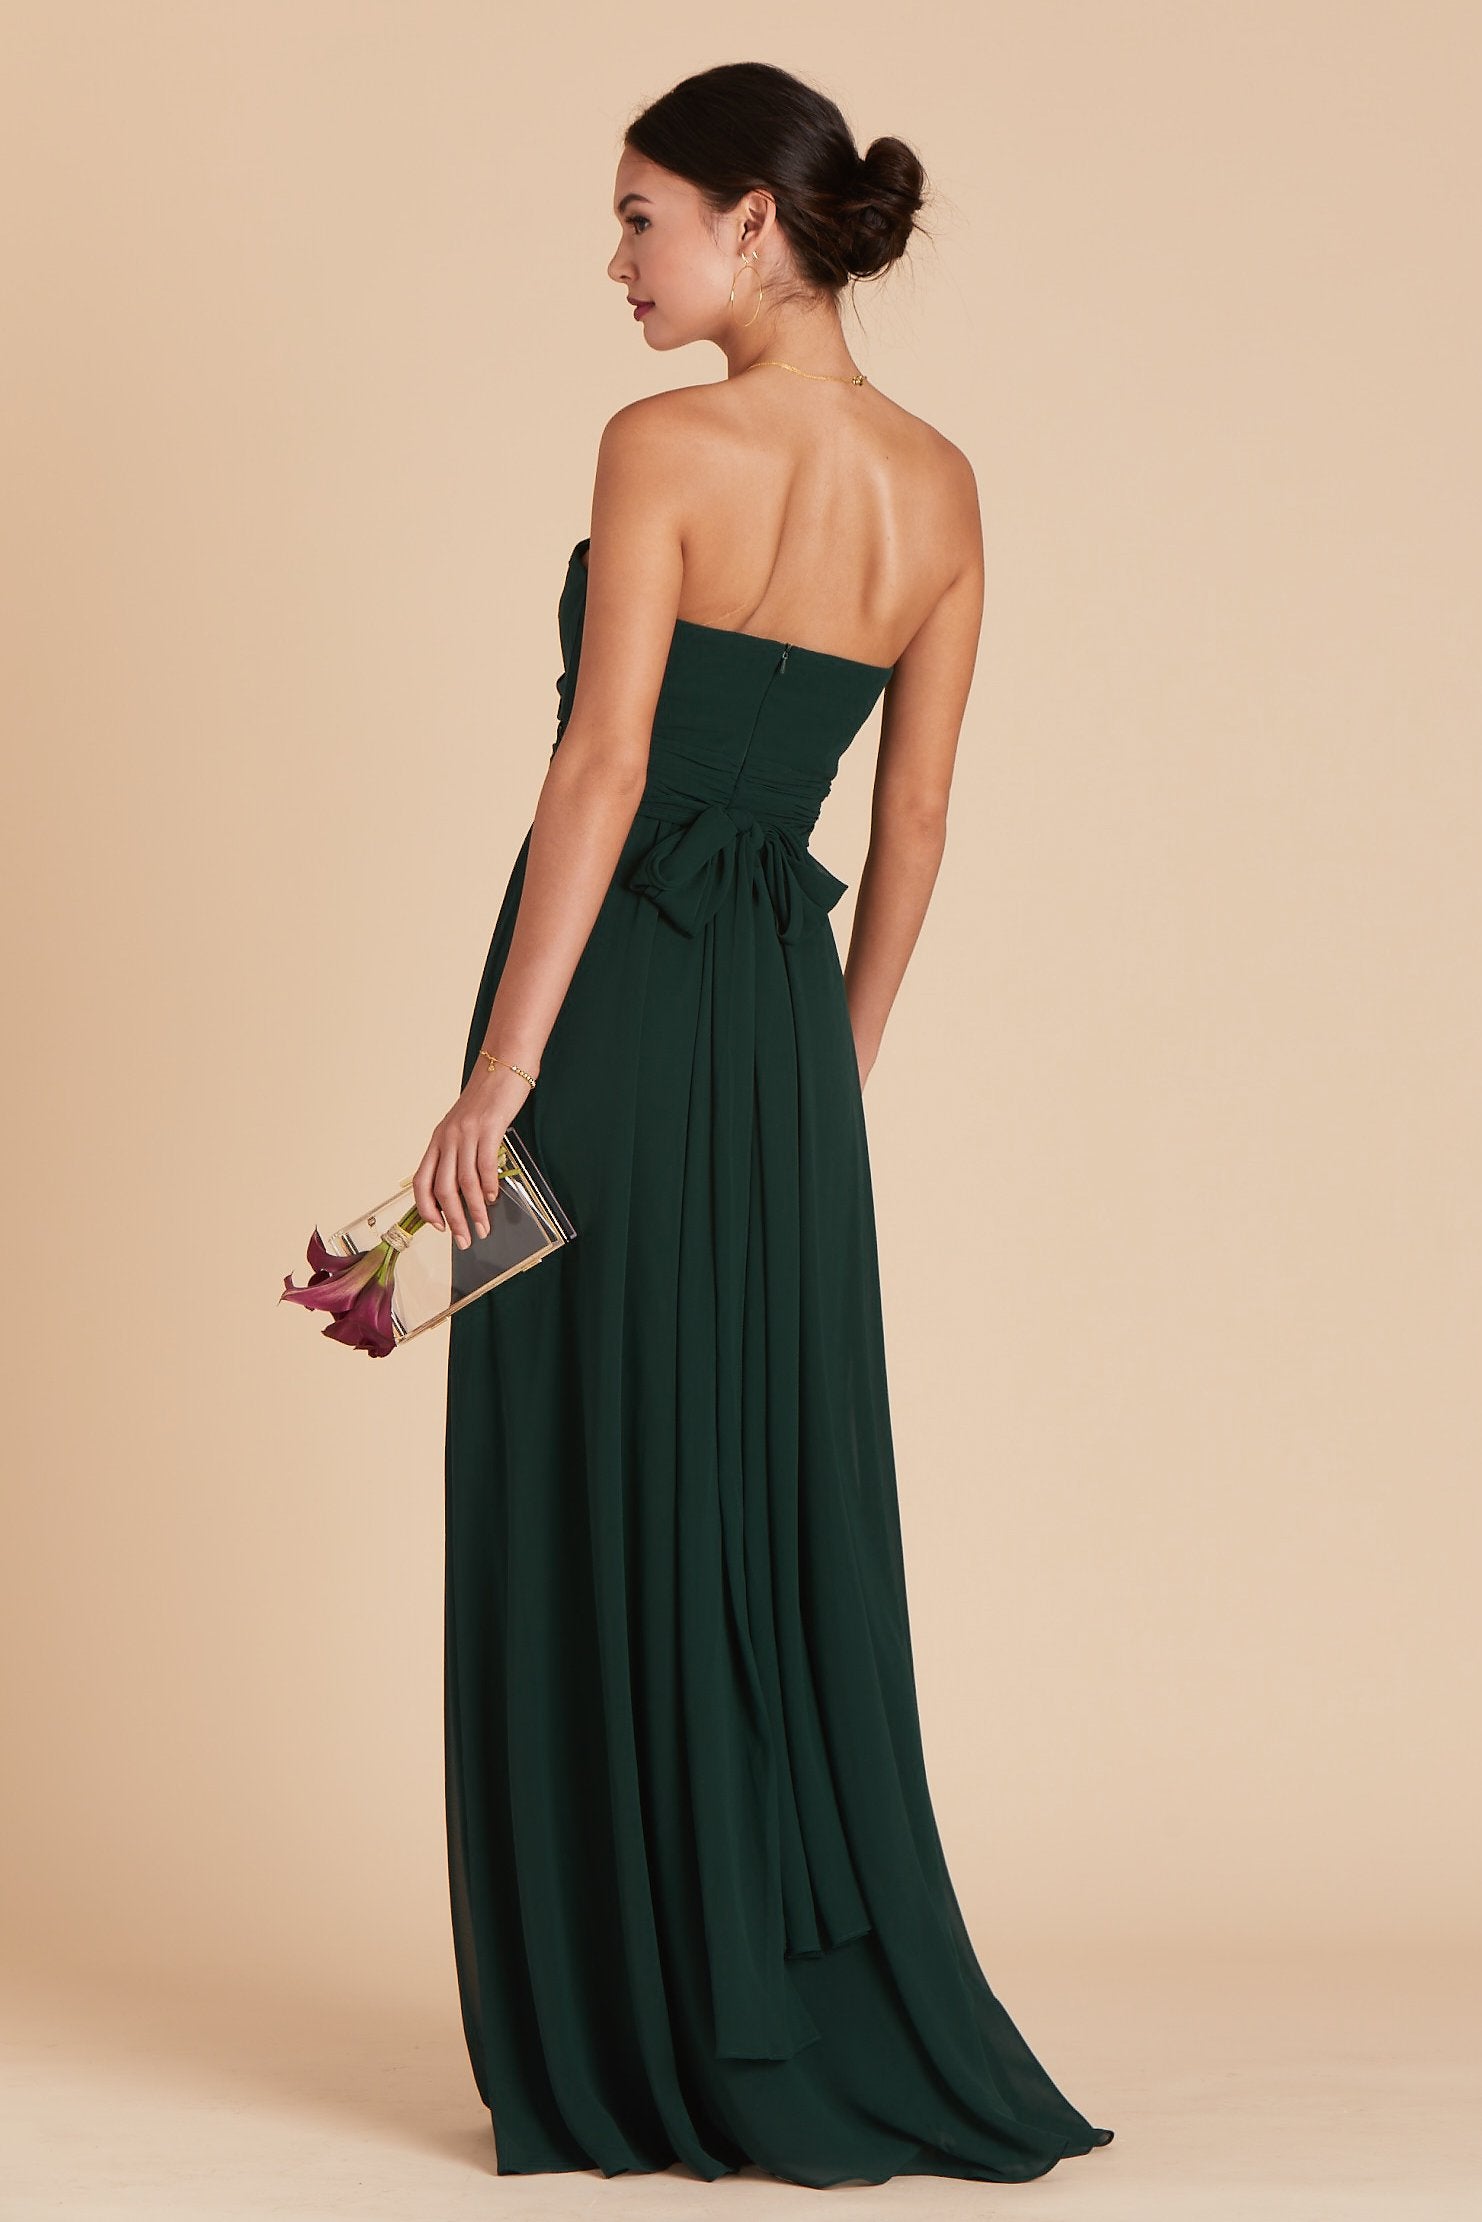 Back view of the Grace Convertible Bridesmaid Dress in emerald chiffon reveals an open back cut below the shoulder blades with front streamers tied around the waist in a delicate and flowing bow.